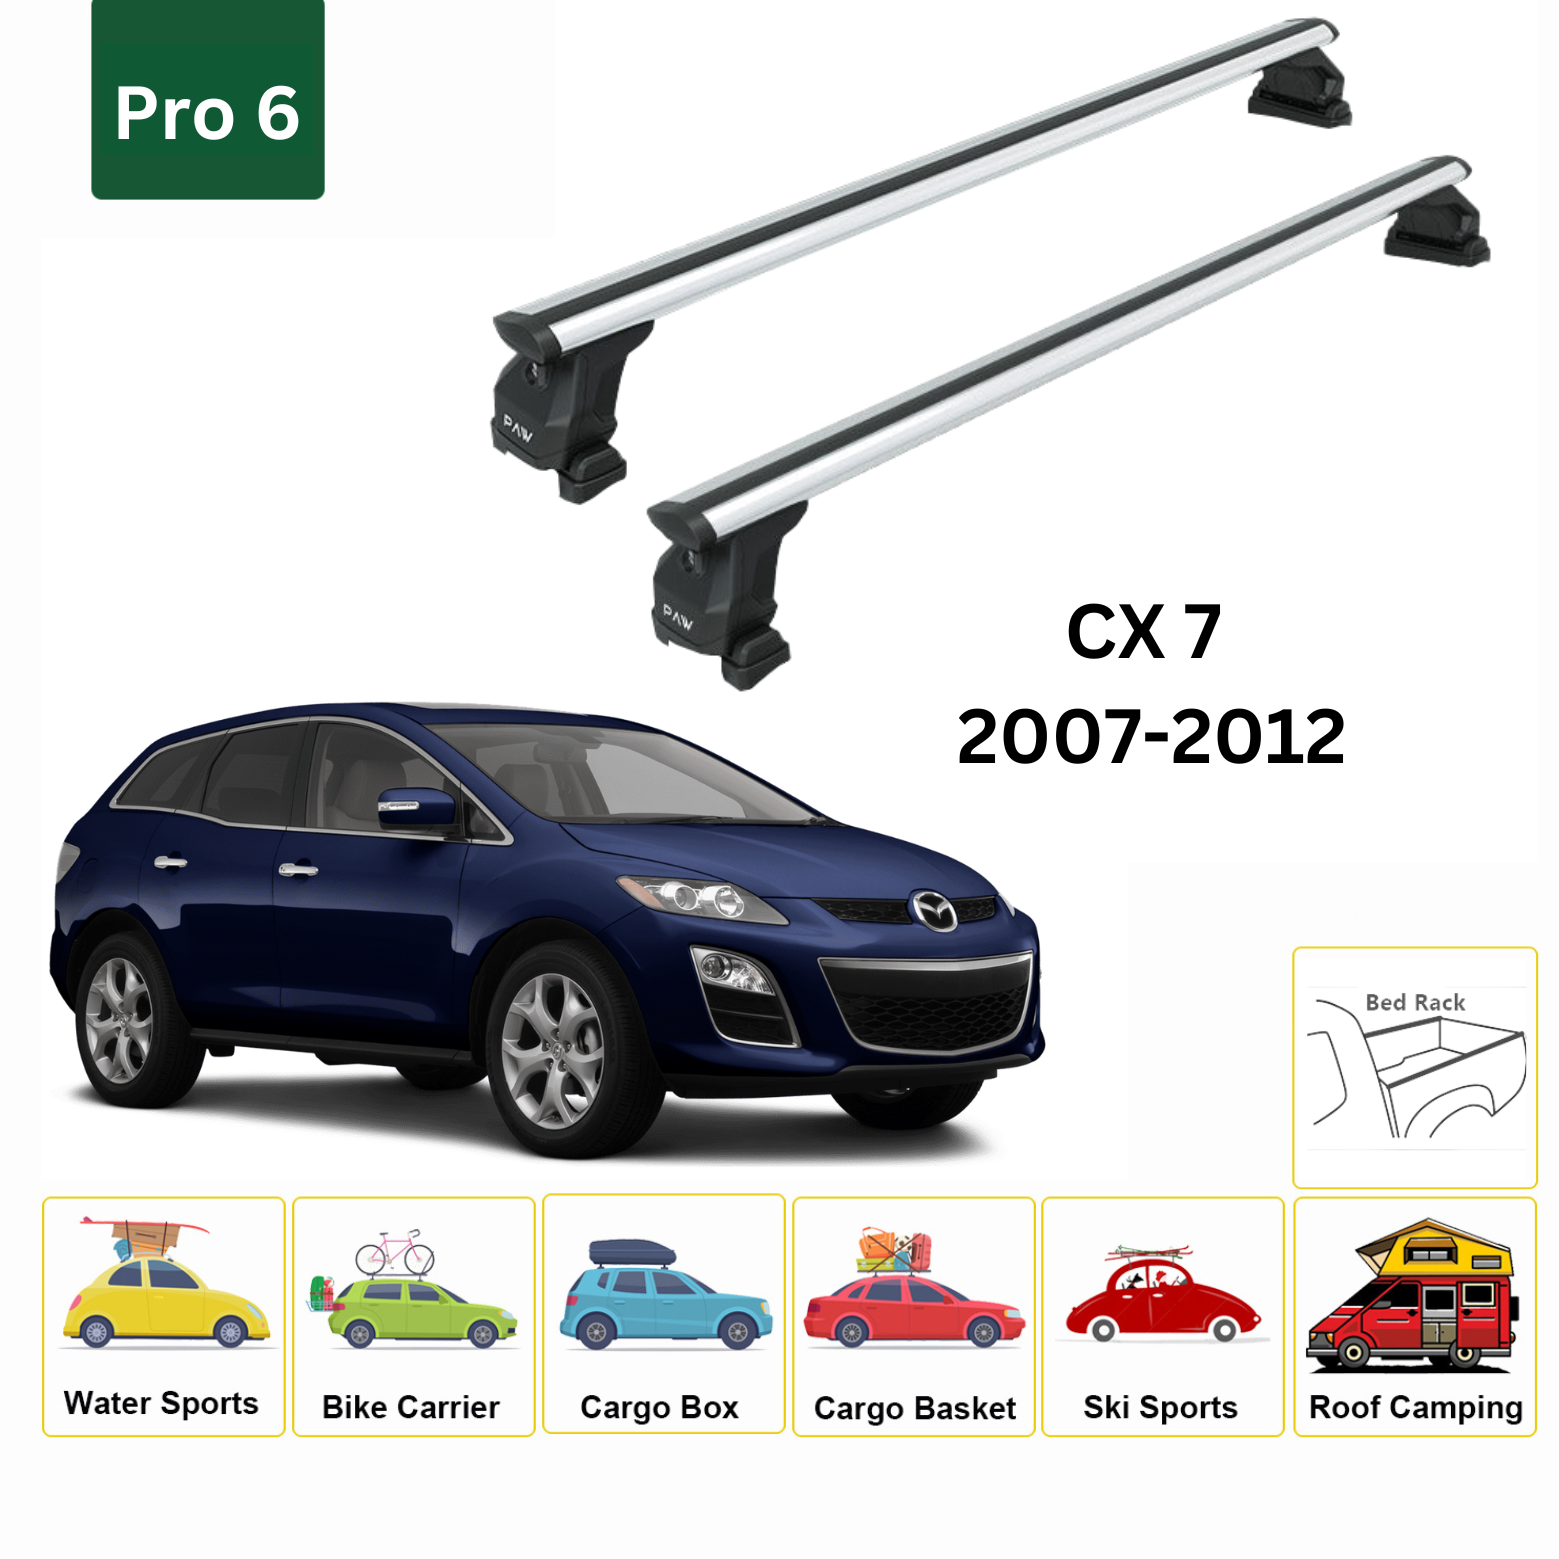 For Mazda CX-7 2007-12 Roof Rack Cross Bars Fix Point Pro 6 Silver